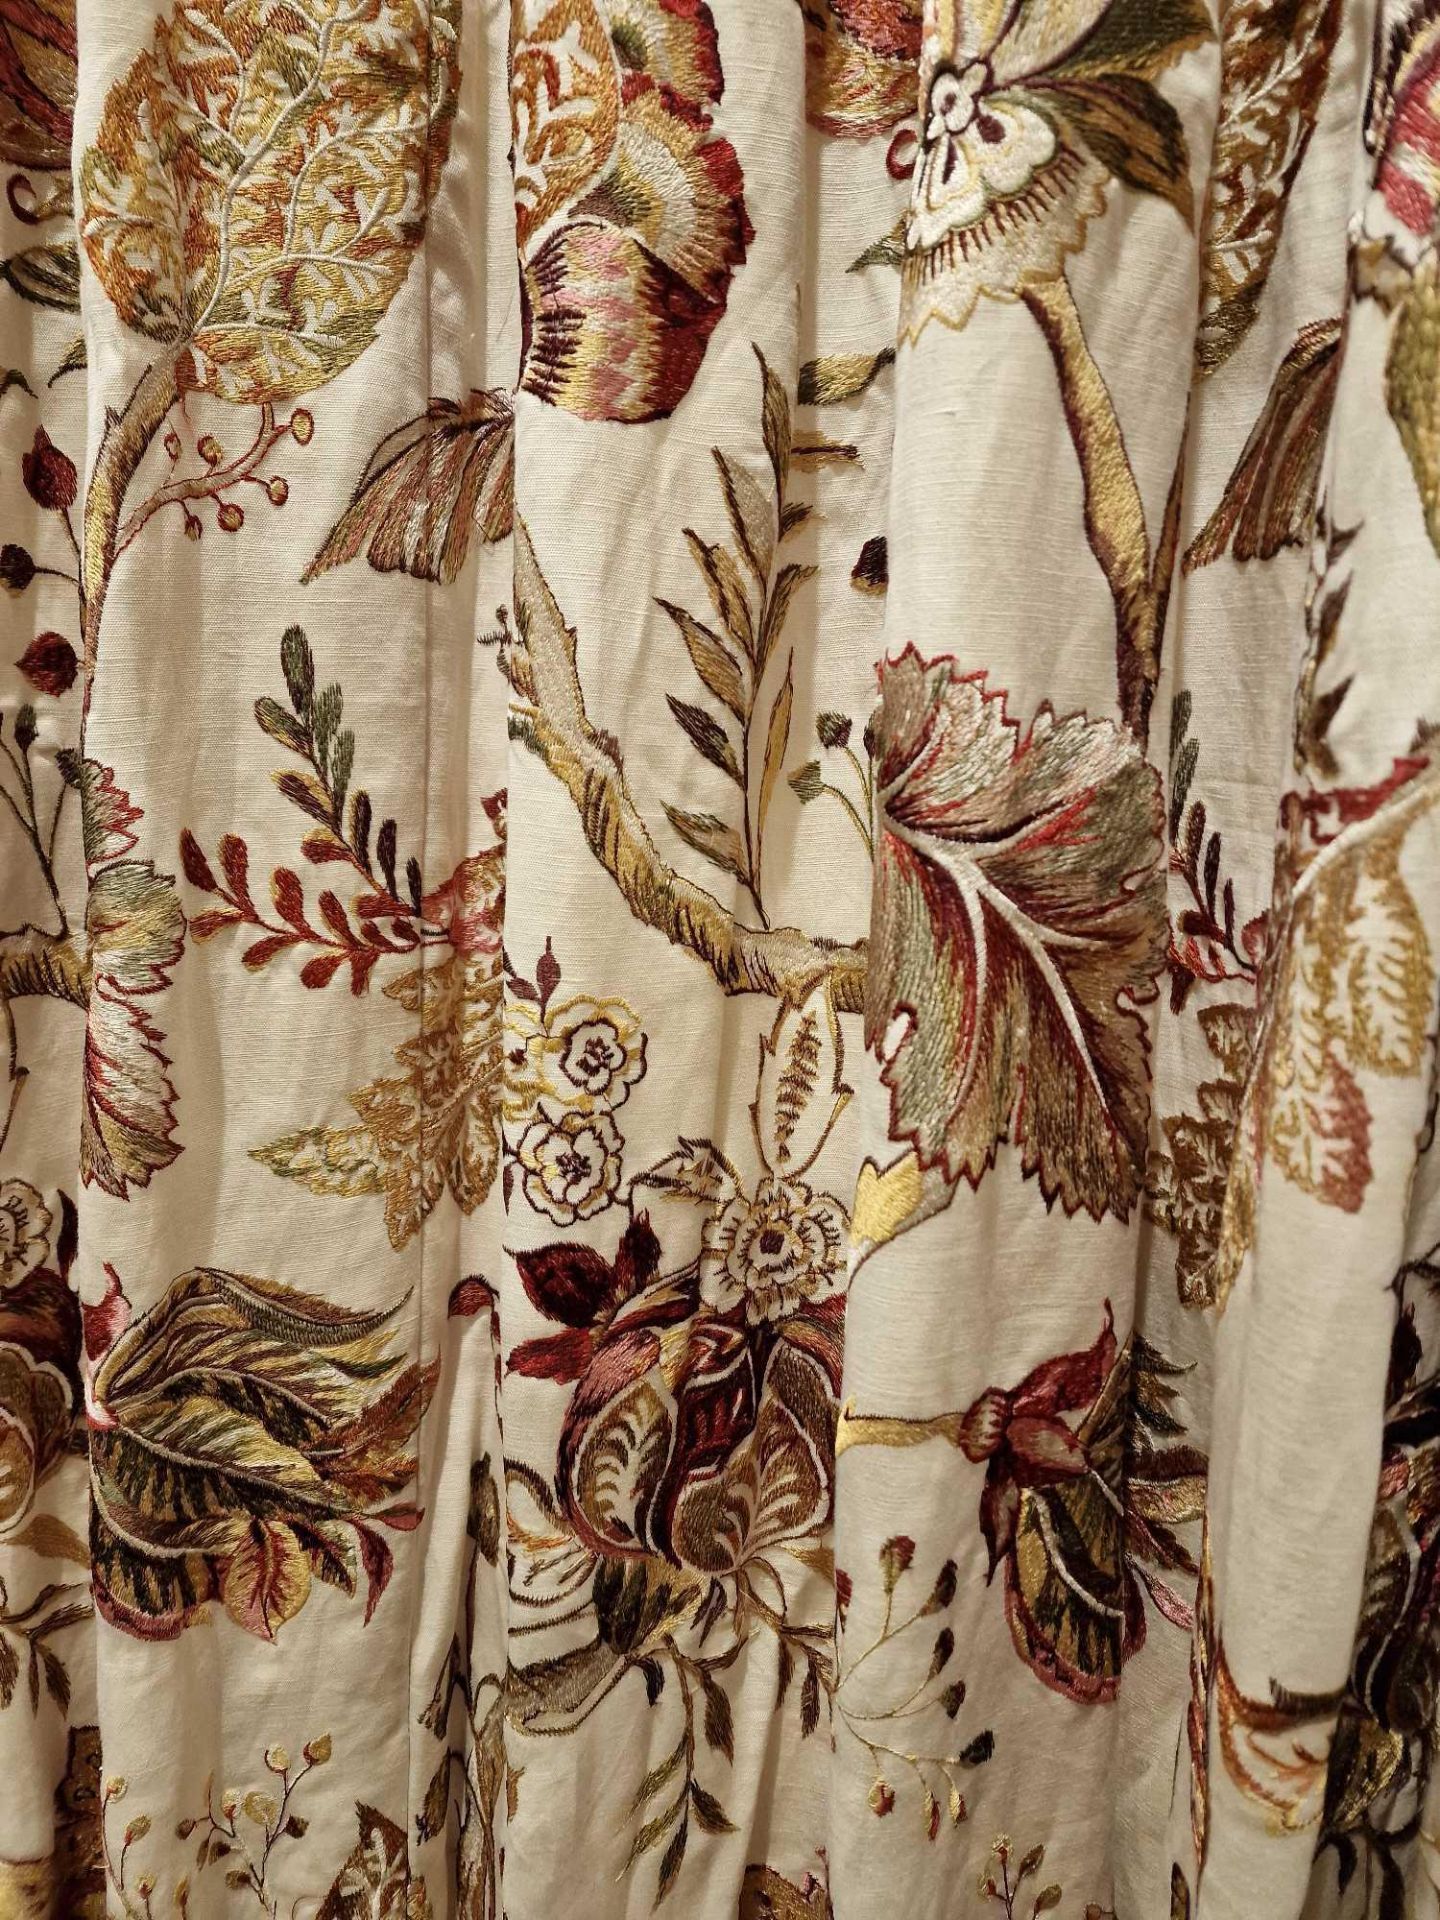 Drapery Ã¢â‚¬â€œ A Pair Of Handmade Bespoke Jacquard Fully Lined Drapery ICPT In Cream With - Image 9 of 9